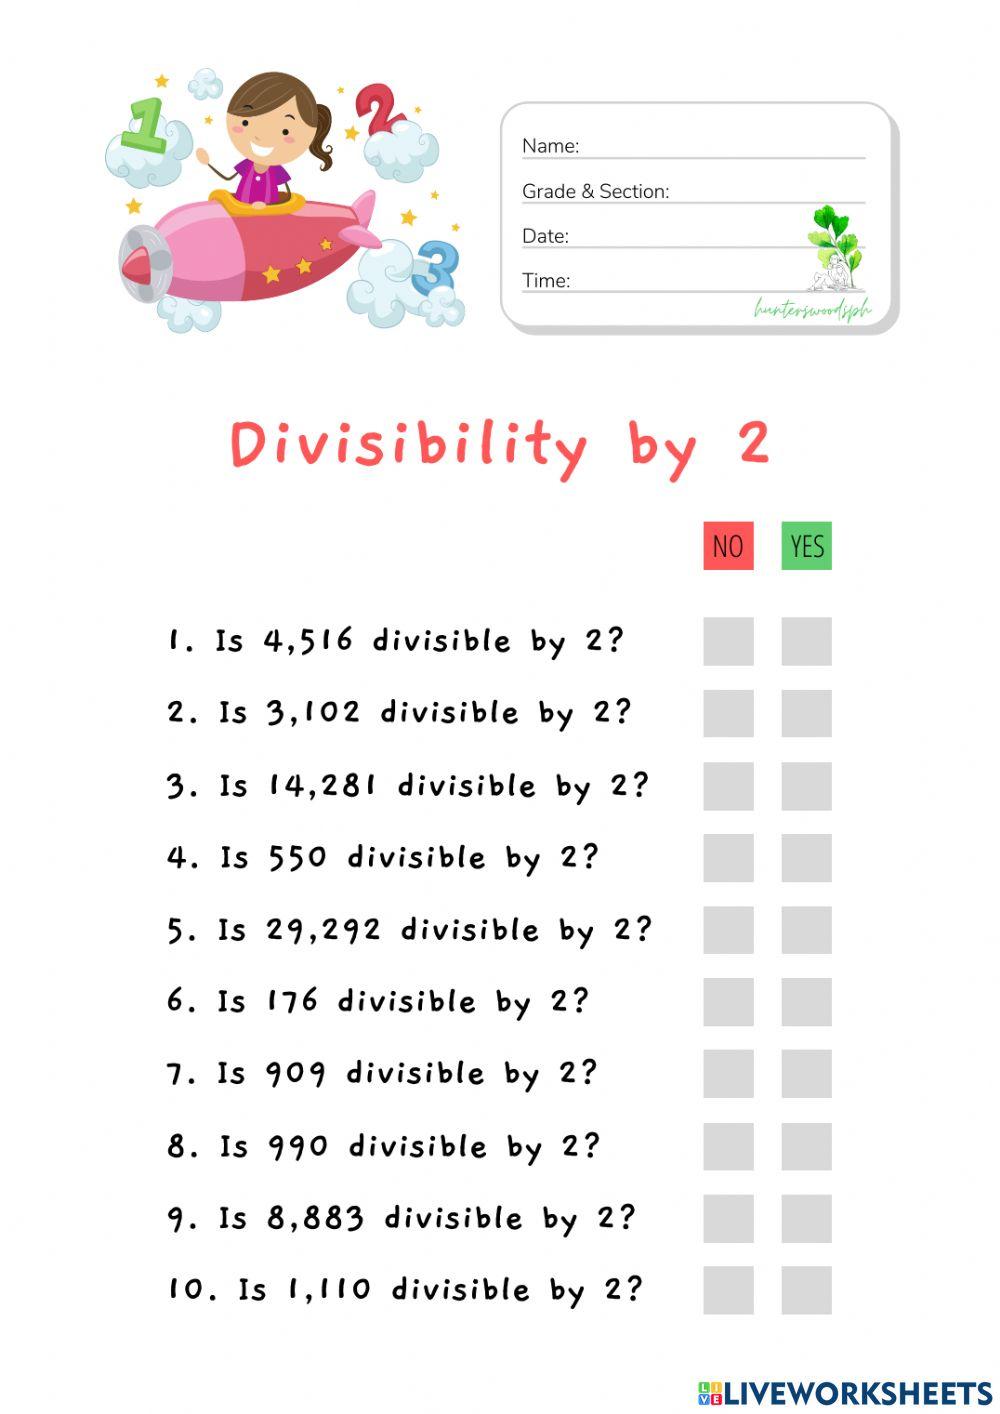 Divisibility by 2 (HuntersWoodsPH Math)